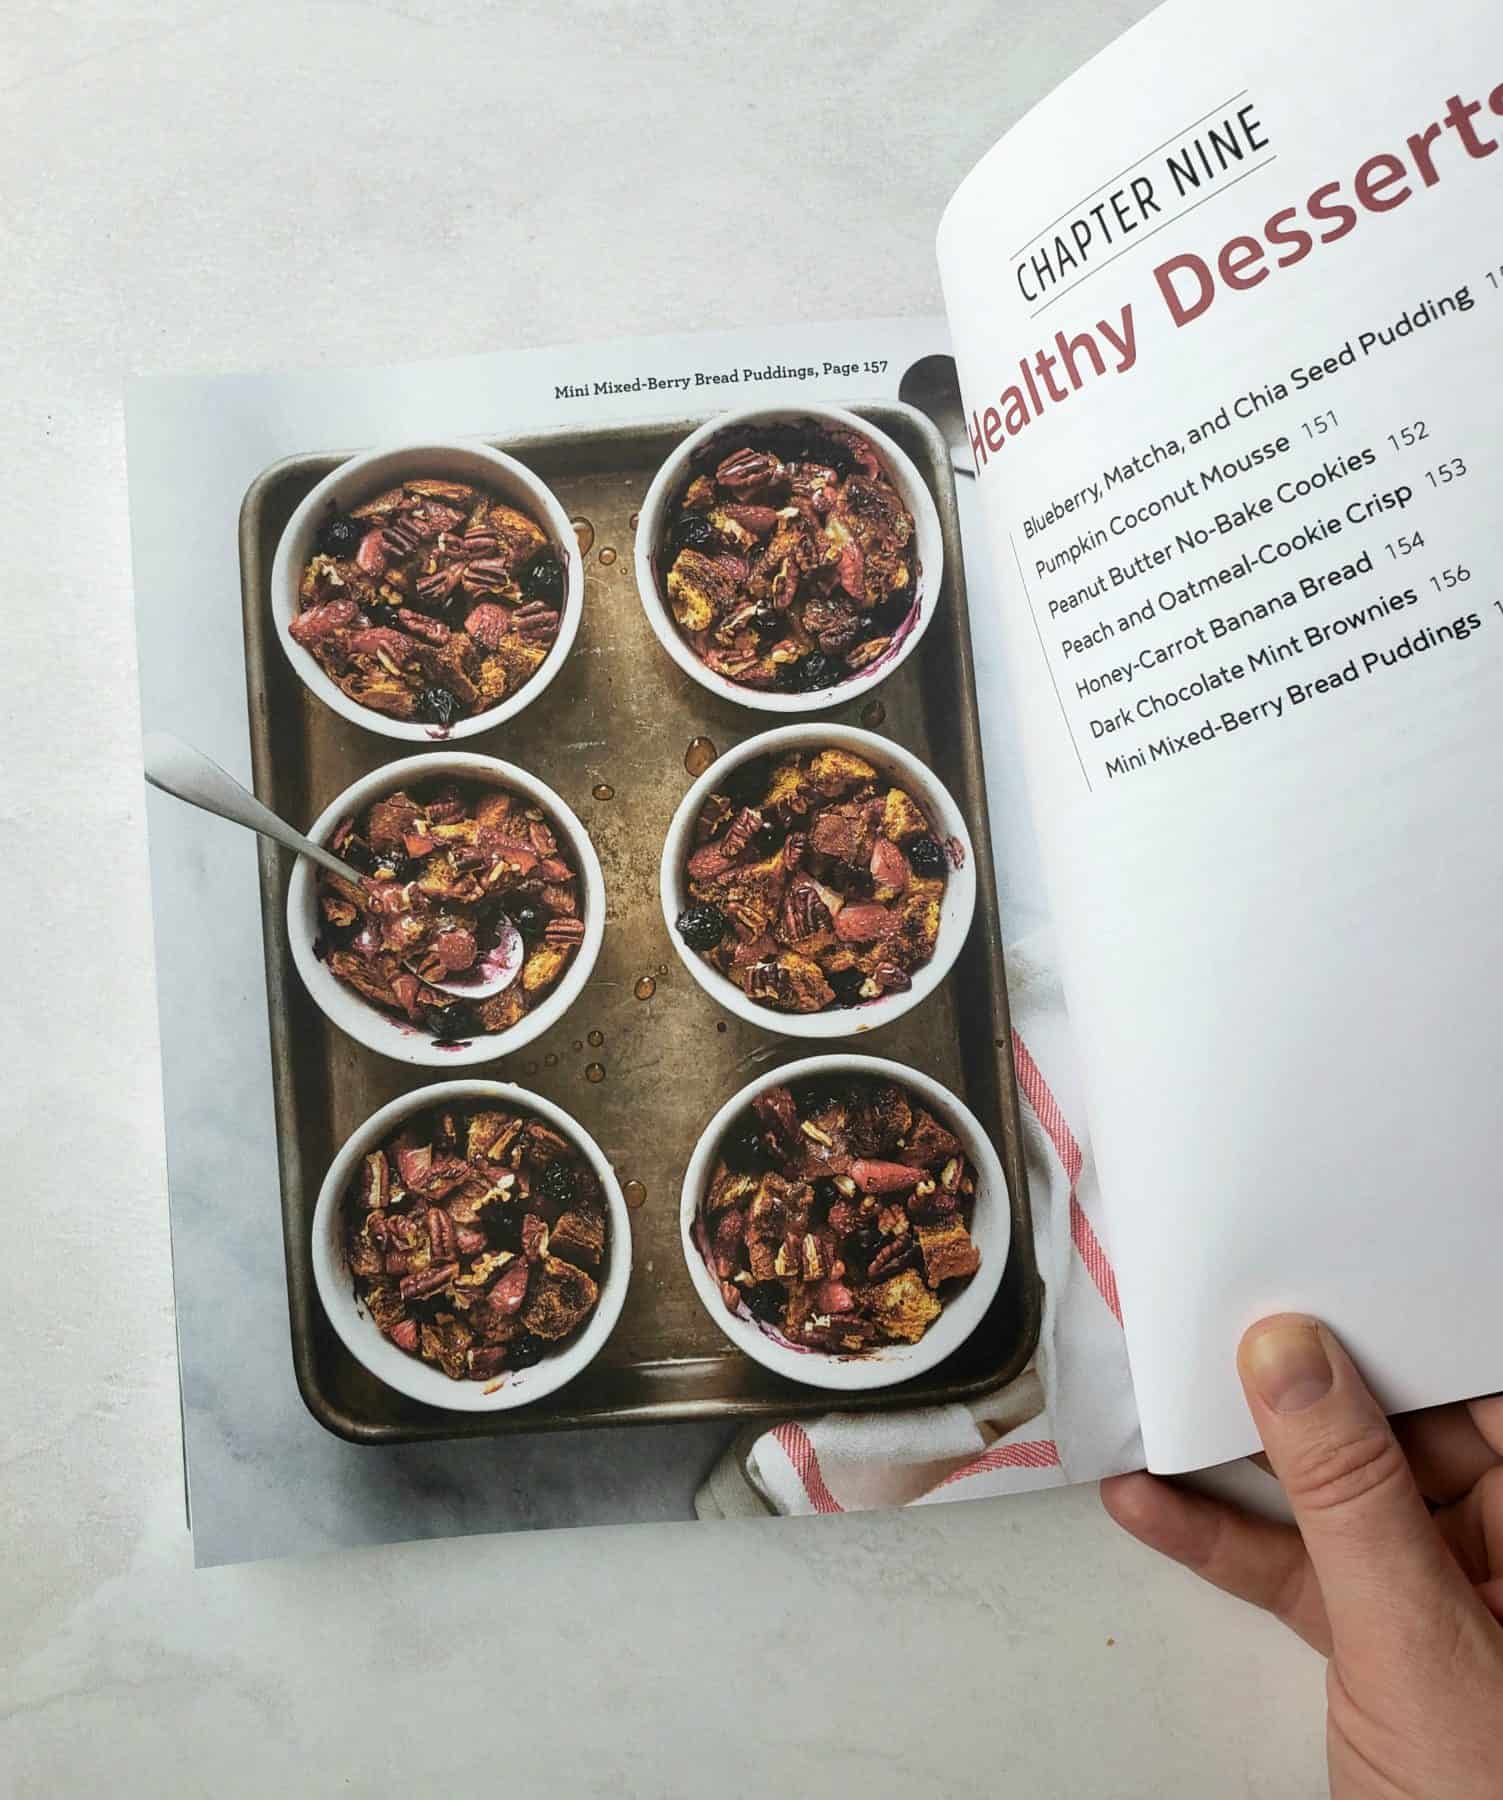 Berry bread puddings in page of cookbook